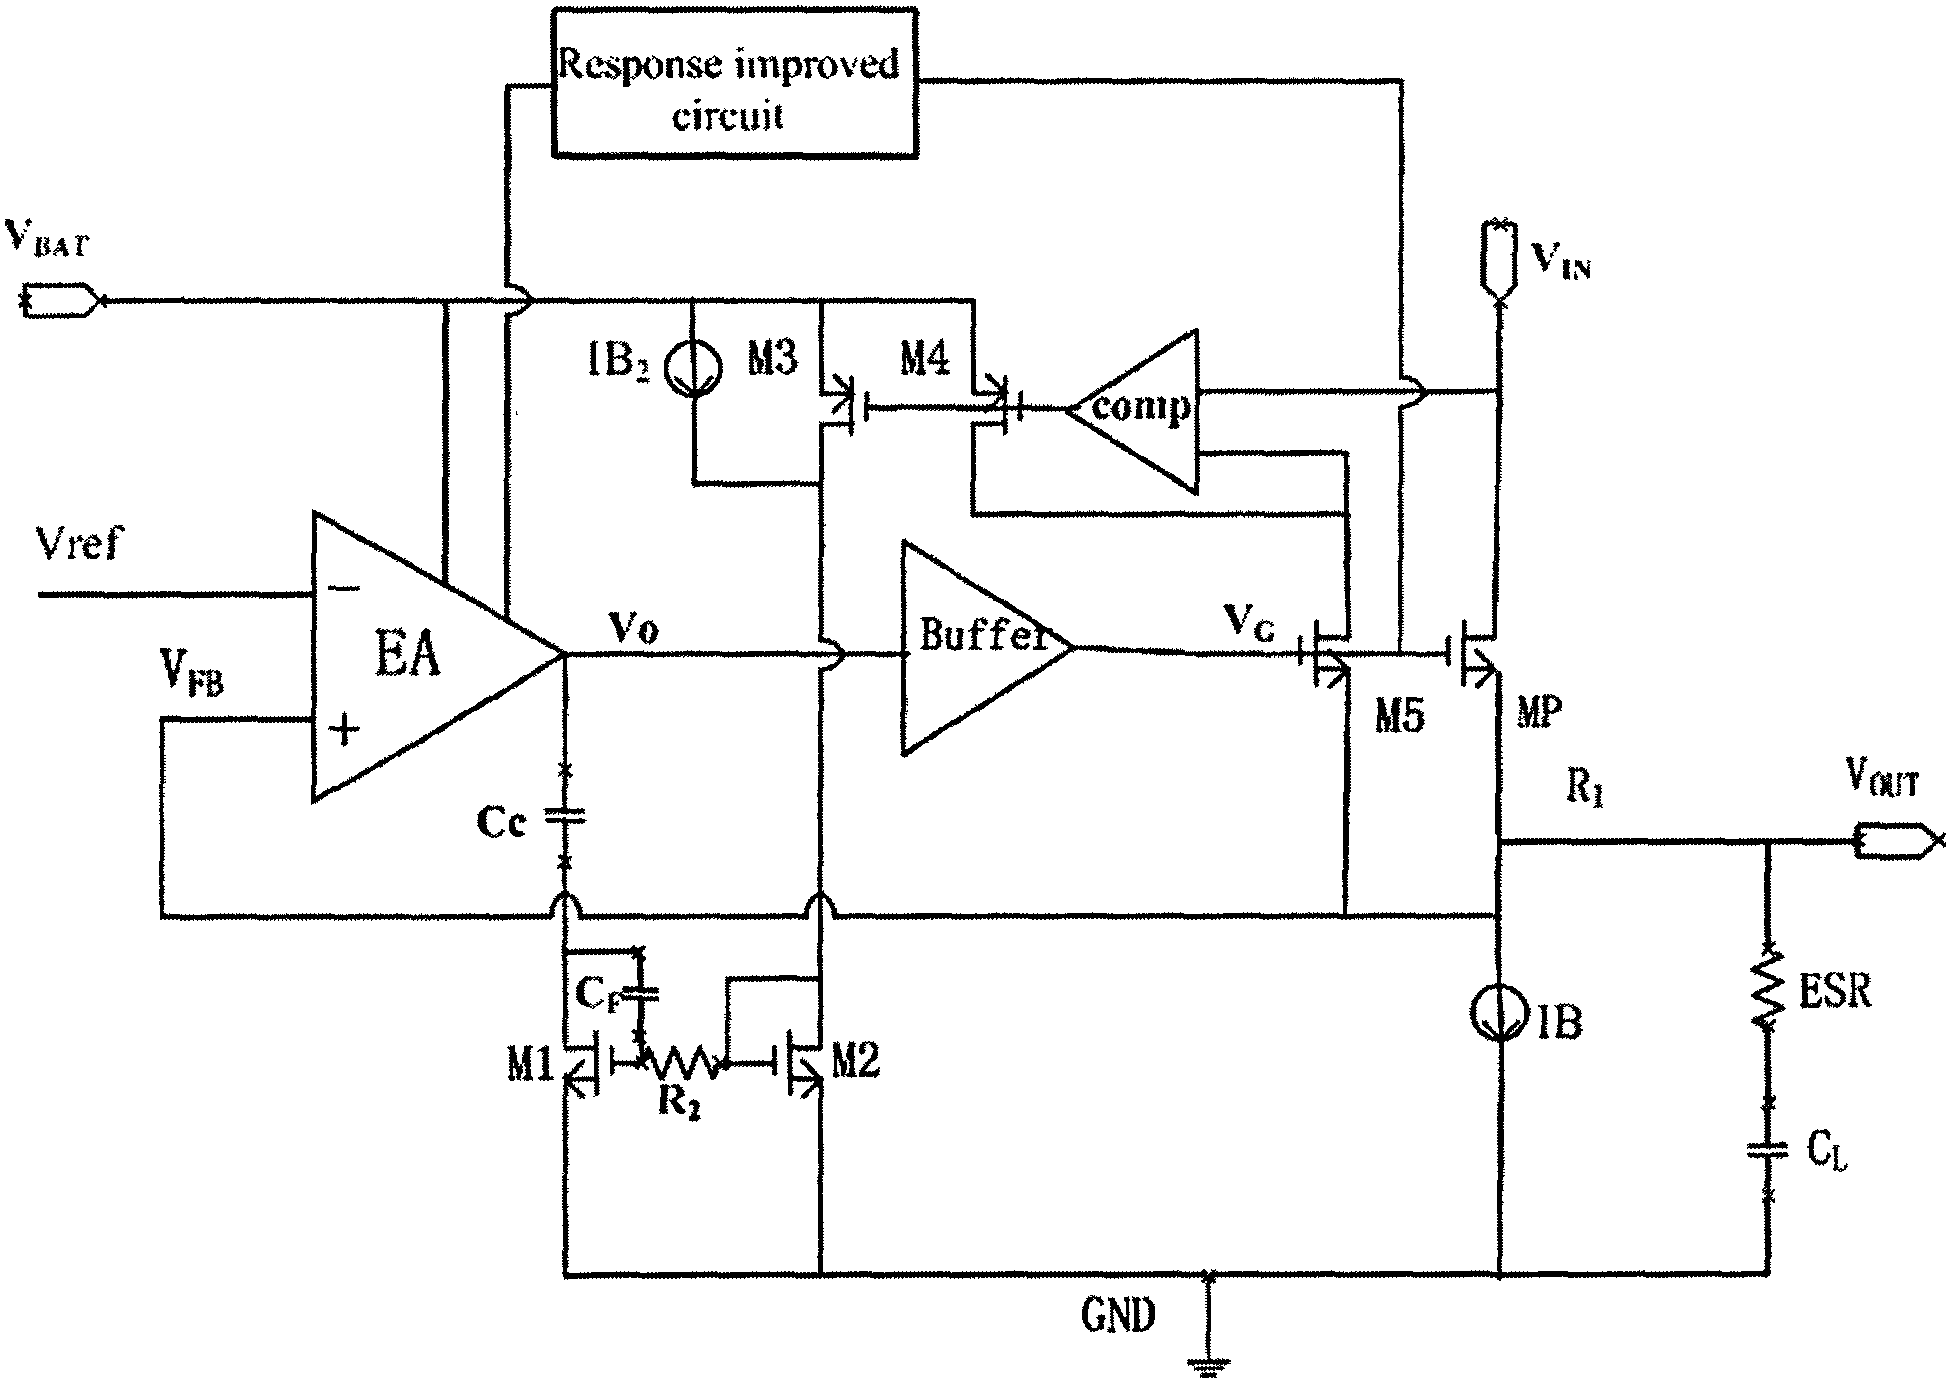 Low dropout linear regulator with quick transient response and high stability